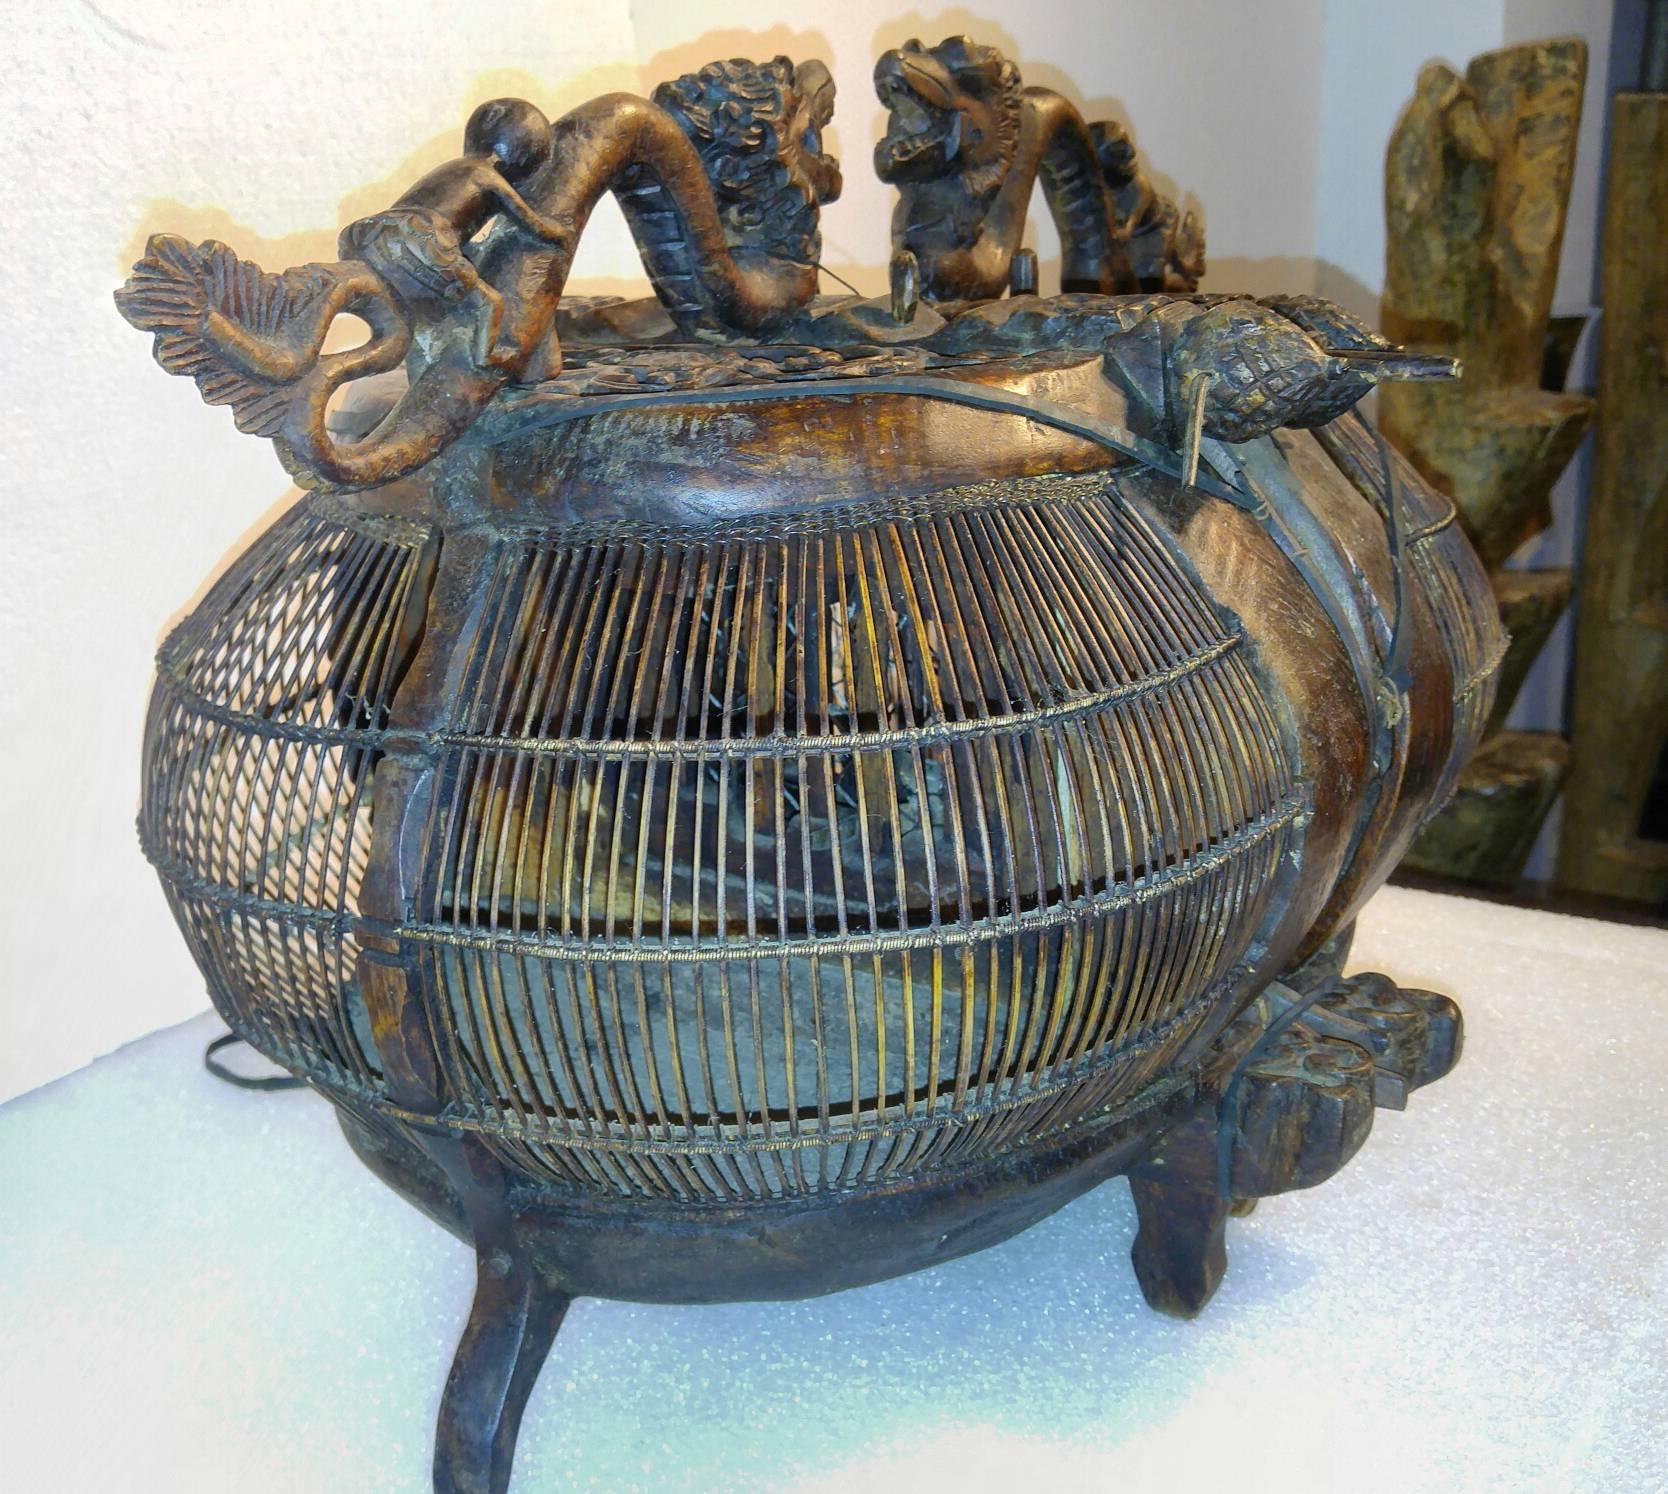 A decoratively carved wooden bird cage from Lombok, Indonesia. Twin cages with carved dragons and riders on top and floral carvings throughout.